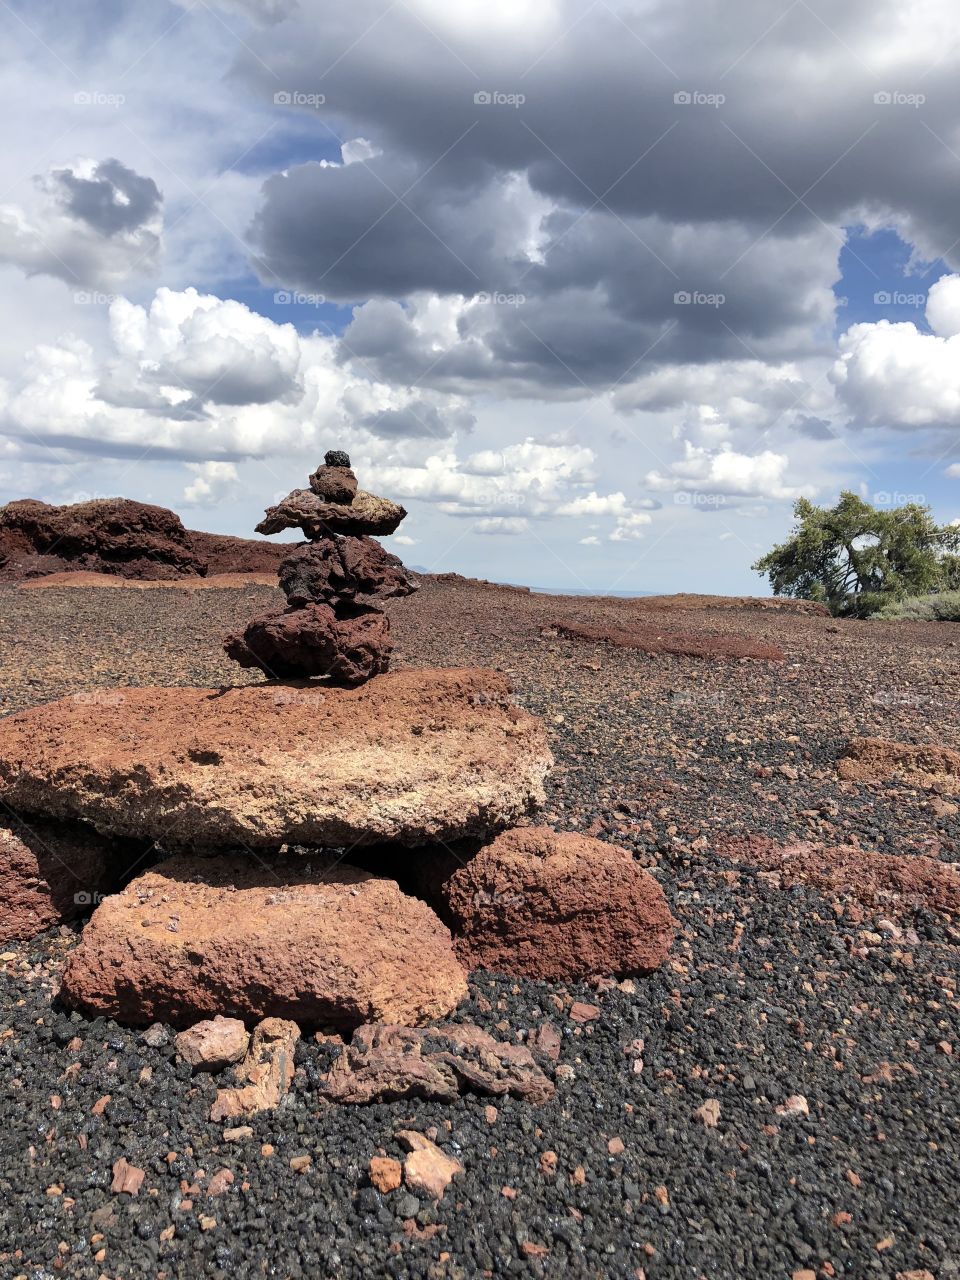 All in Balance. Volcanic rocks from Craters of the Moon balanced on top of each other. 